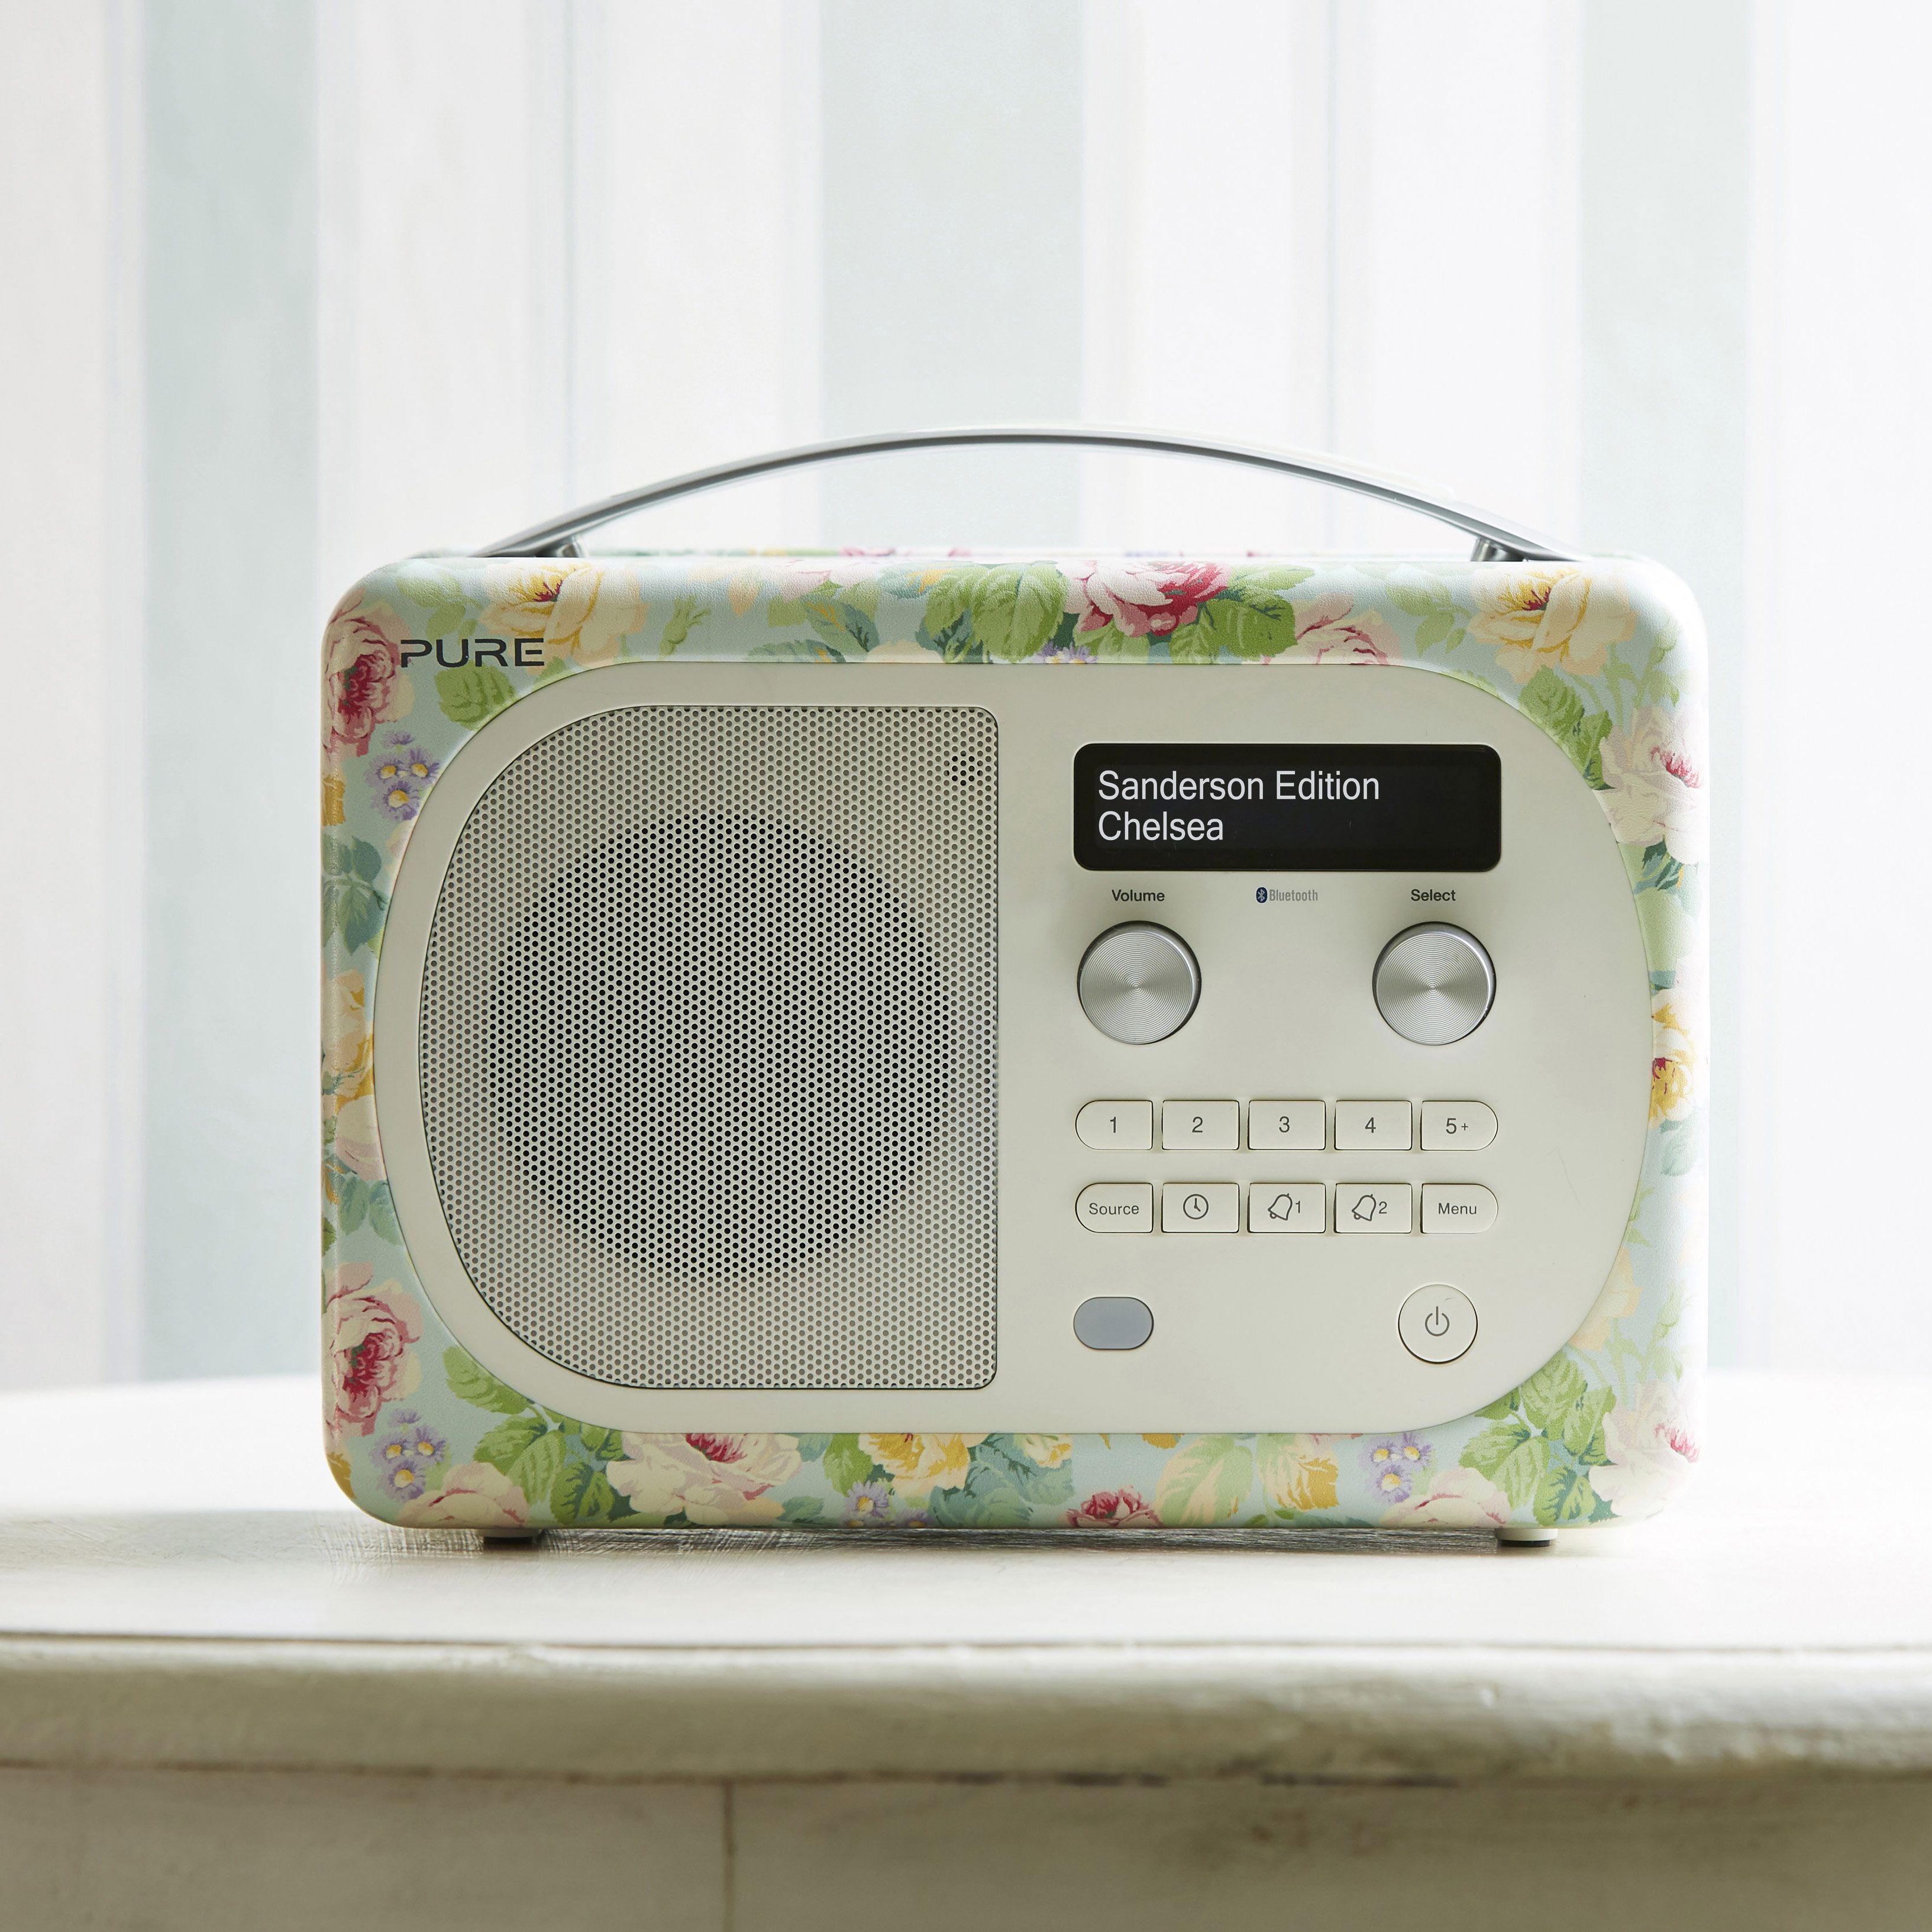 Pure launches Evoke DAB radios with Sanderson prints - Good Housekeeping Institute